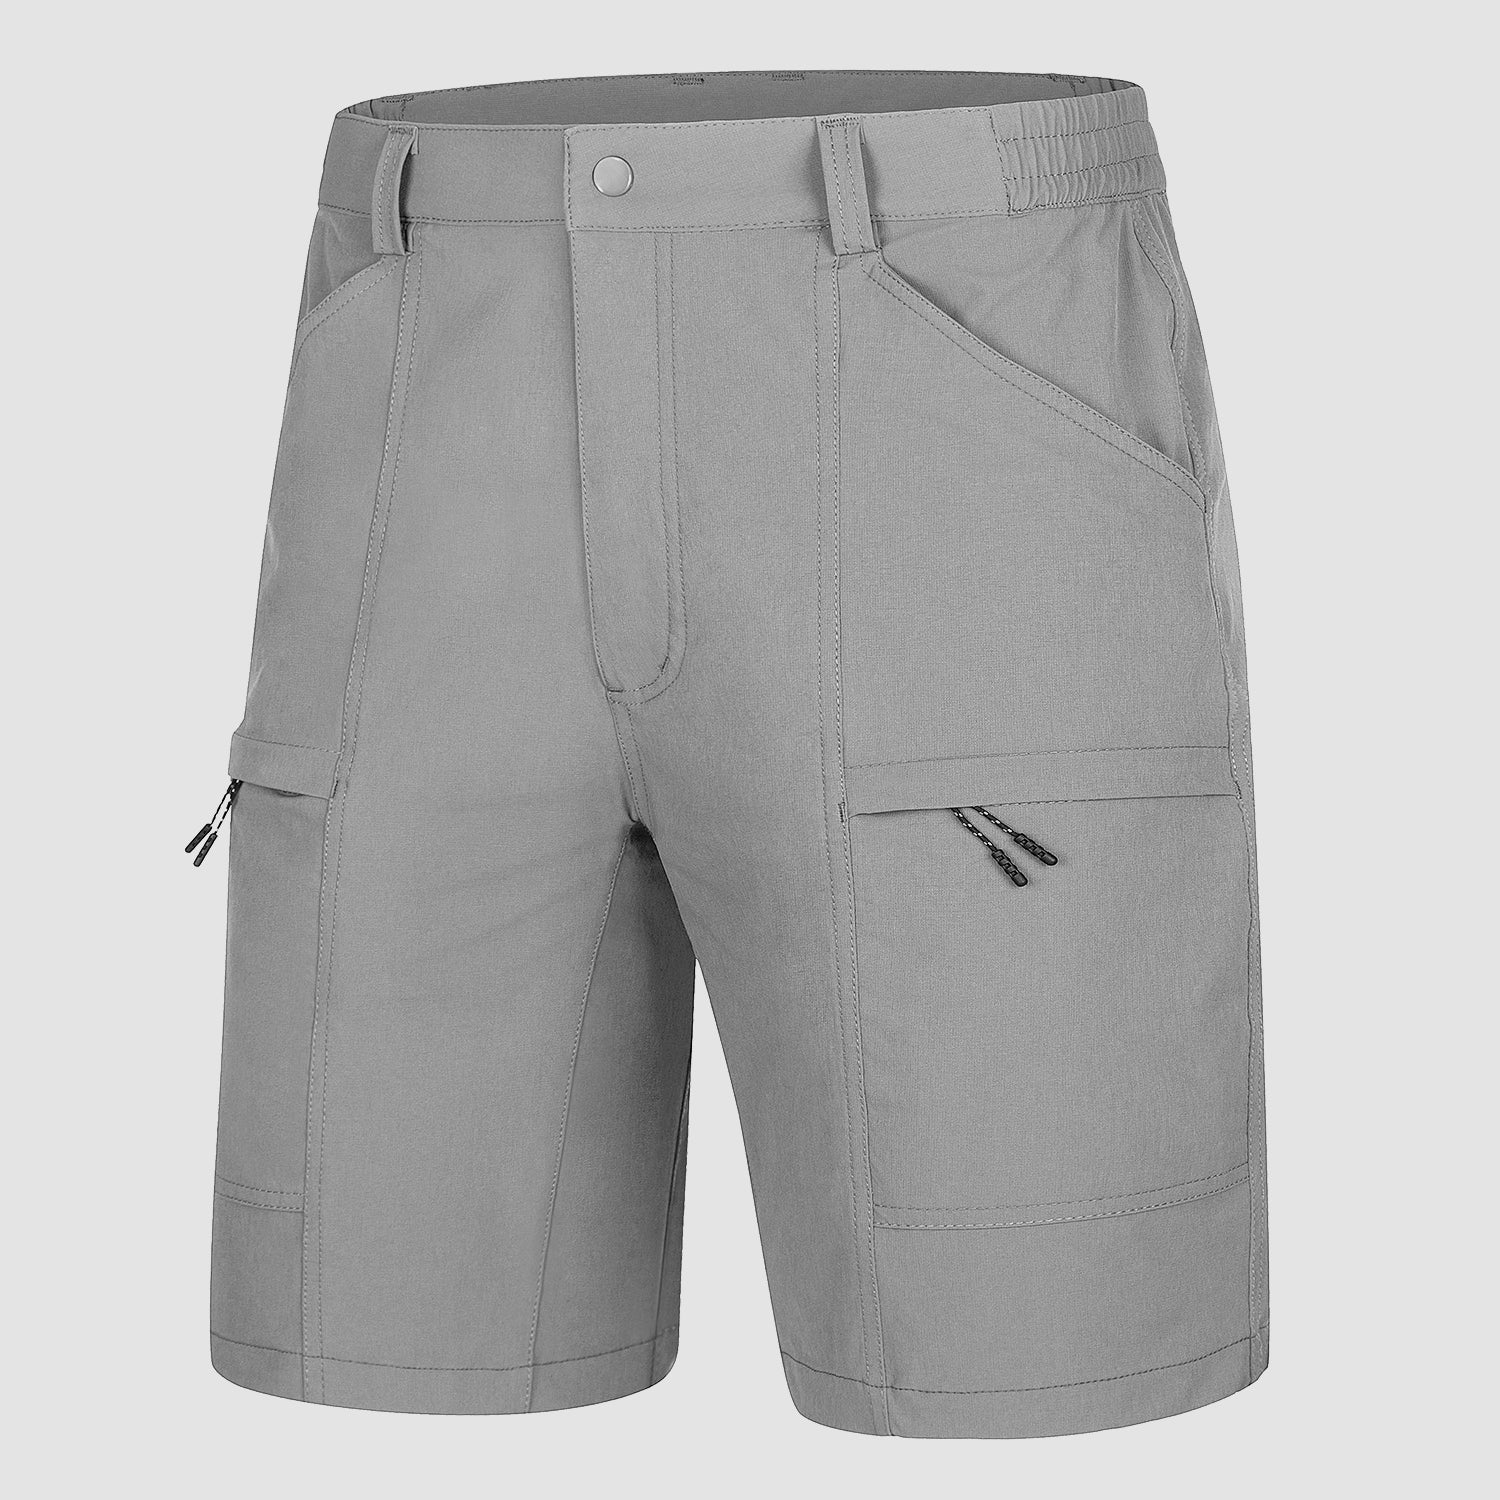 Men's Hiking Shorts with 5 Pockets Water-Resistant Ripstop Quick Dry Fishing Shorts